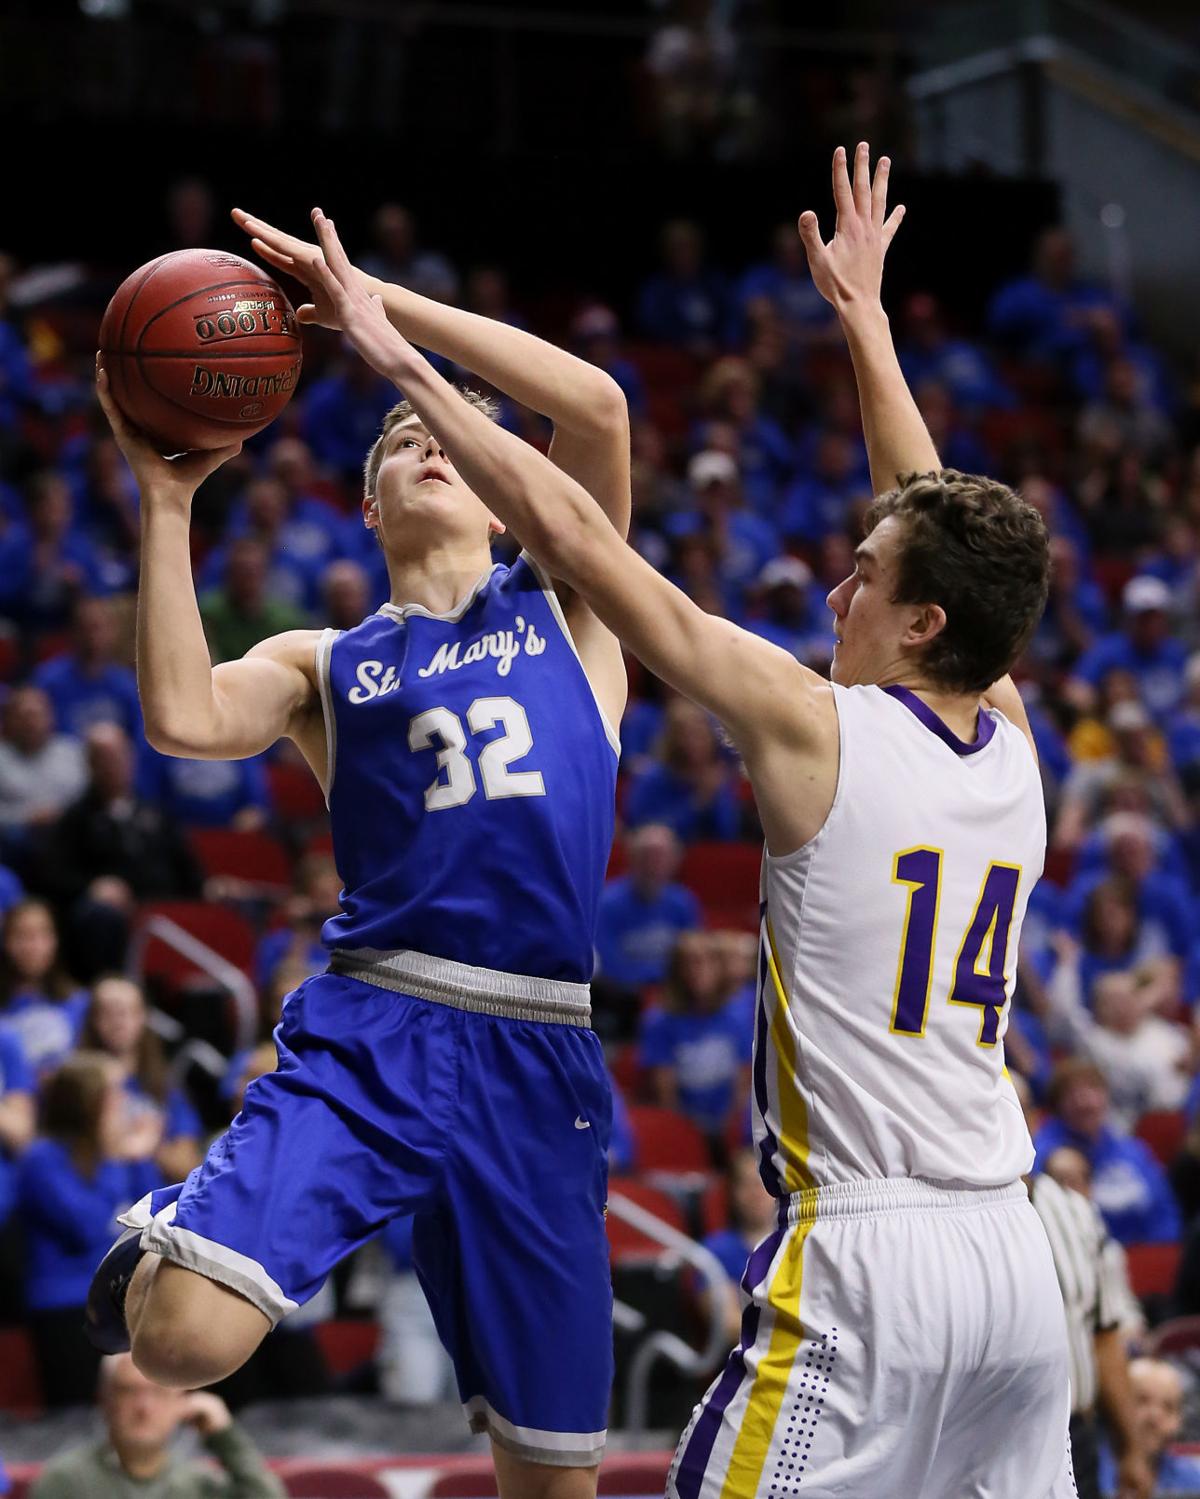 SIOUXLAND ATHLETE: Ruden a vocal leader in Remsen St. Mary's switching  defense